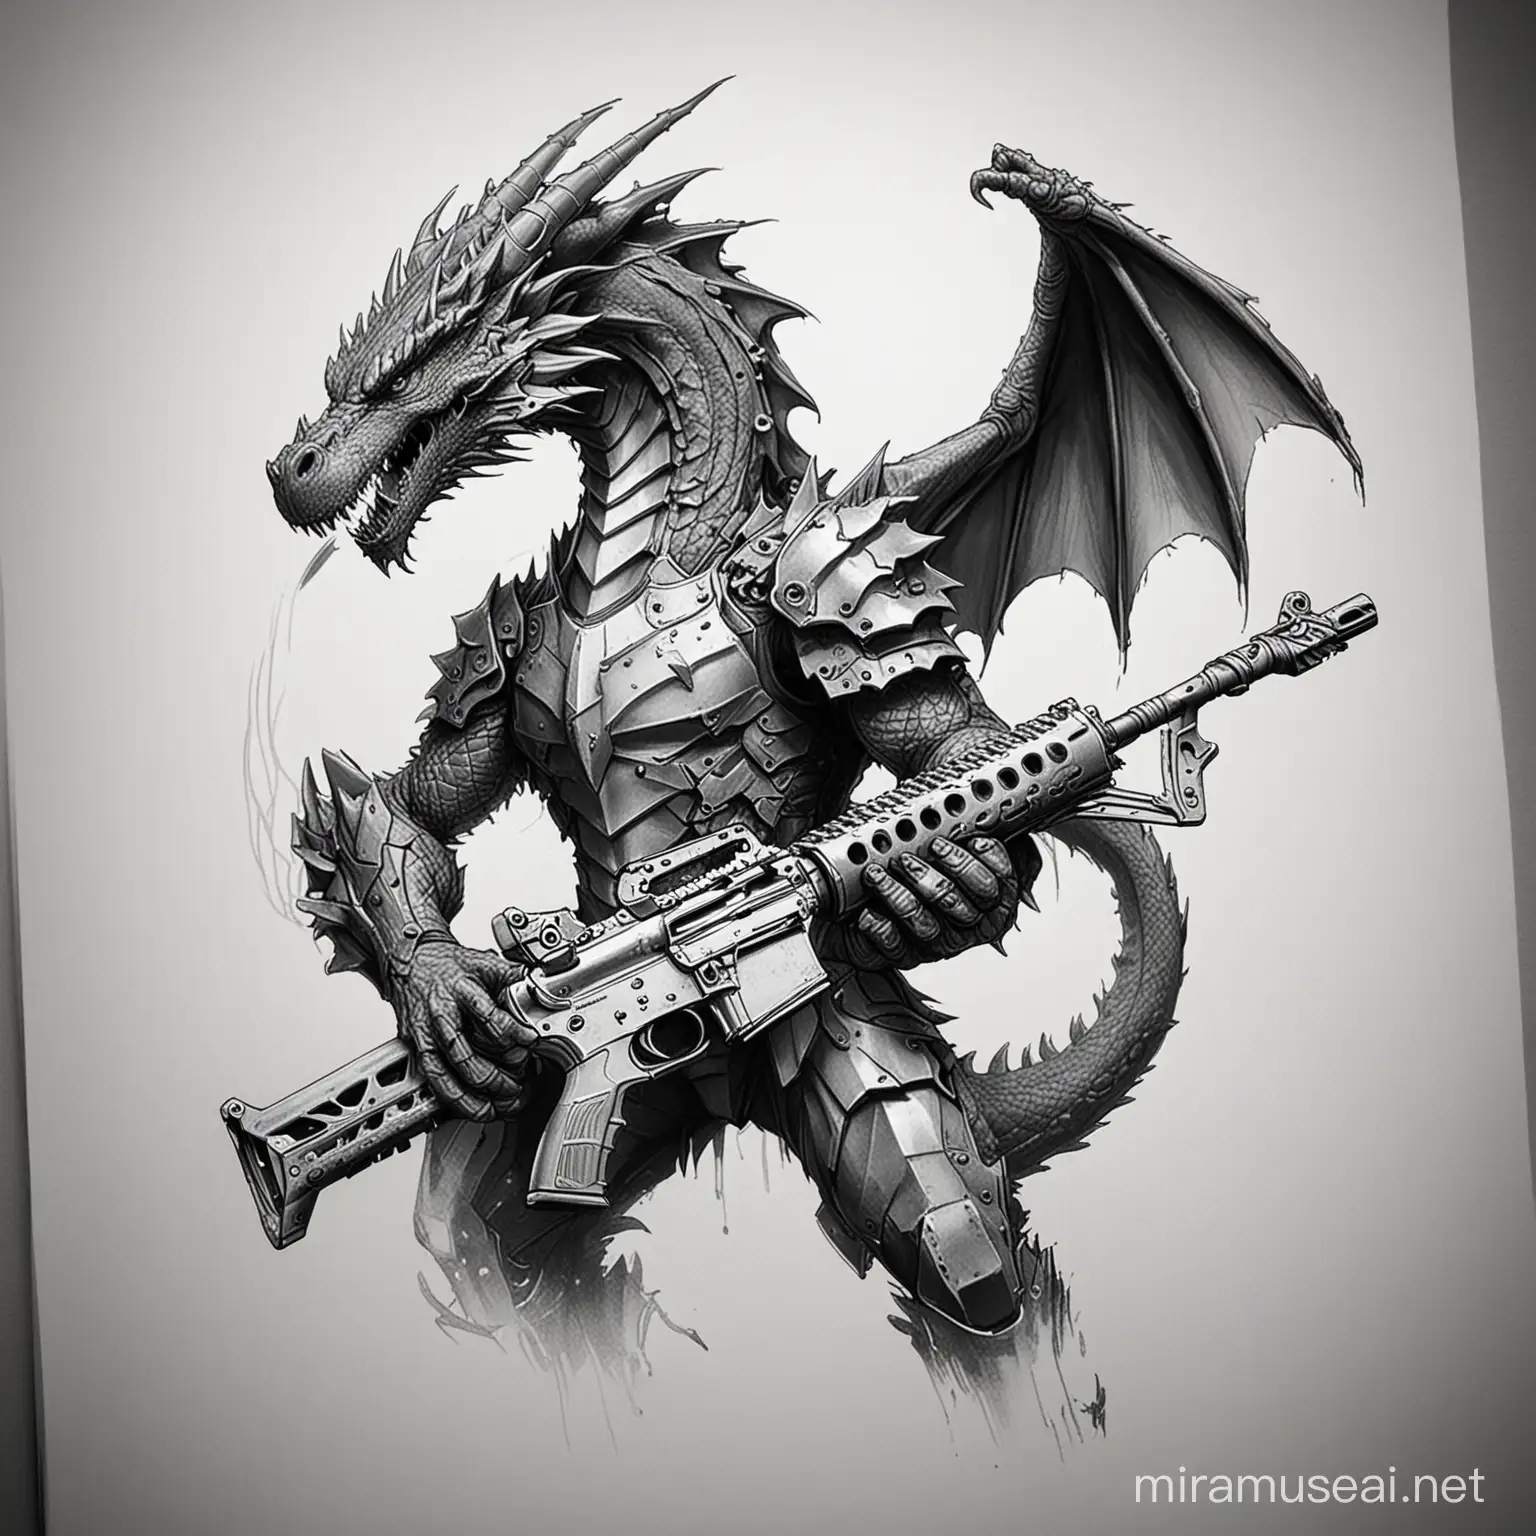 Simple Sketch of a dragon holding M4 AR, make him look nice, like a logo, black and white